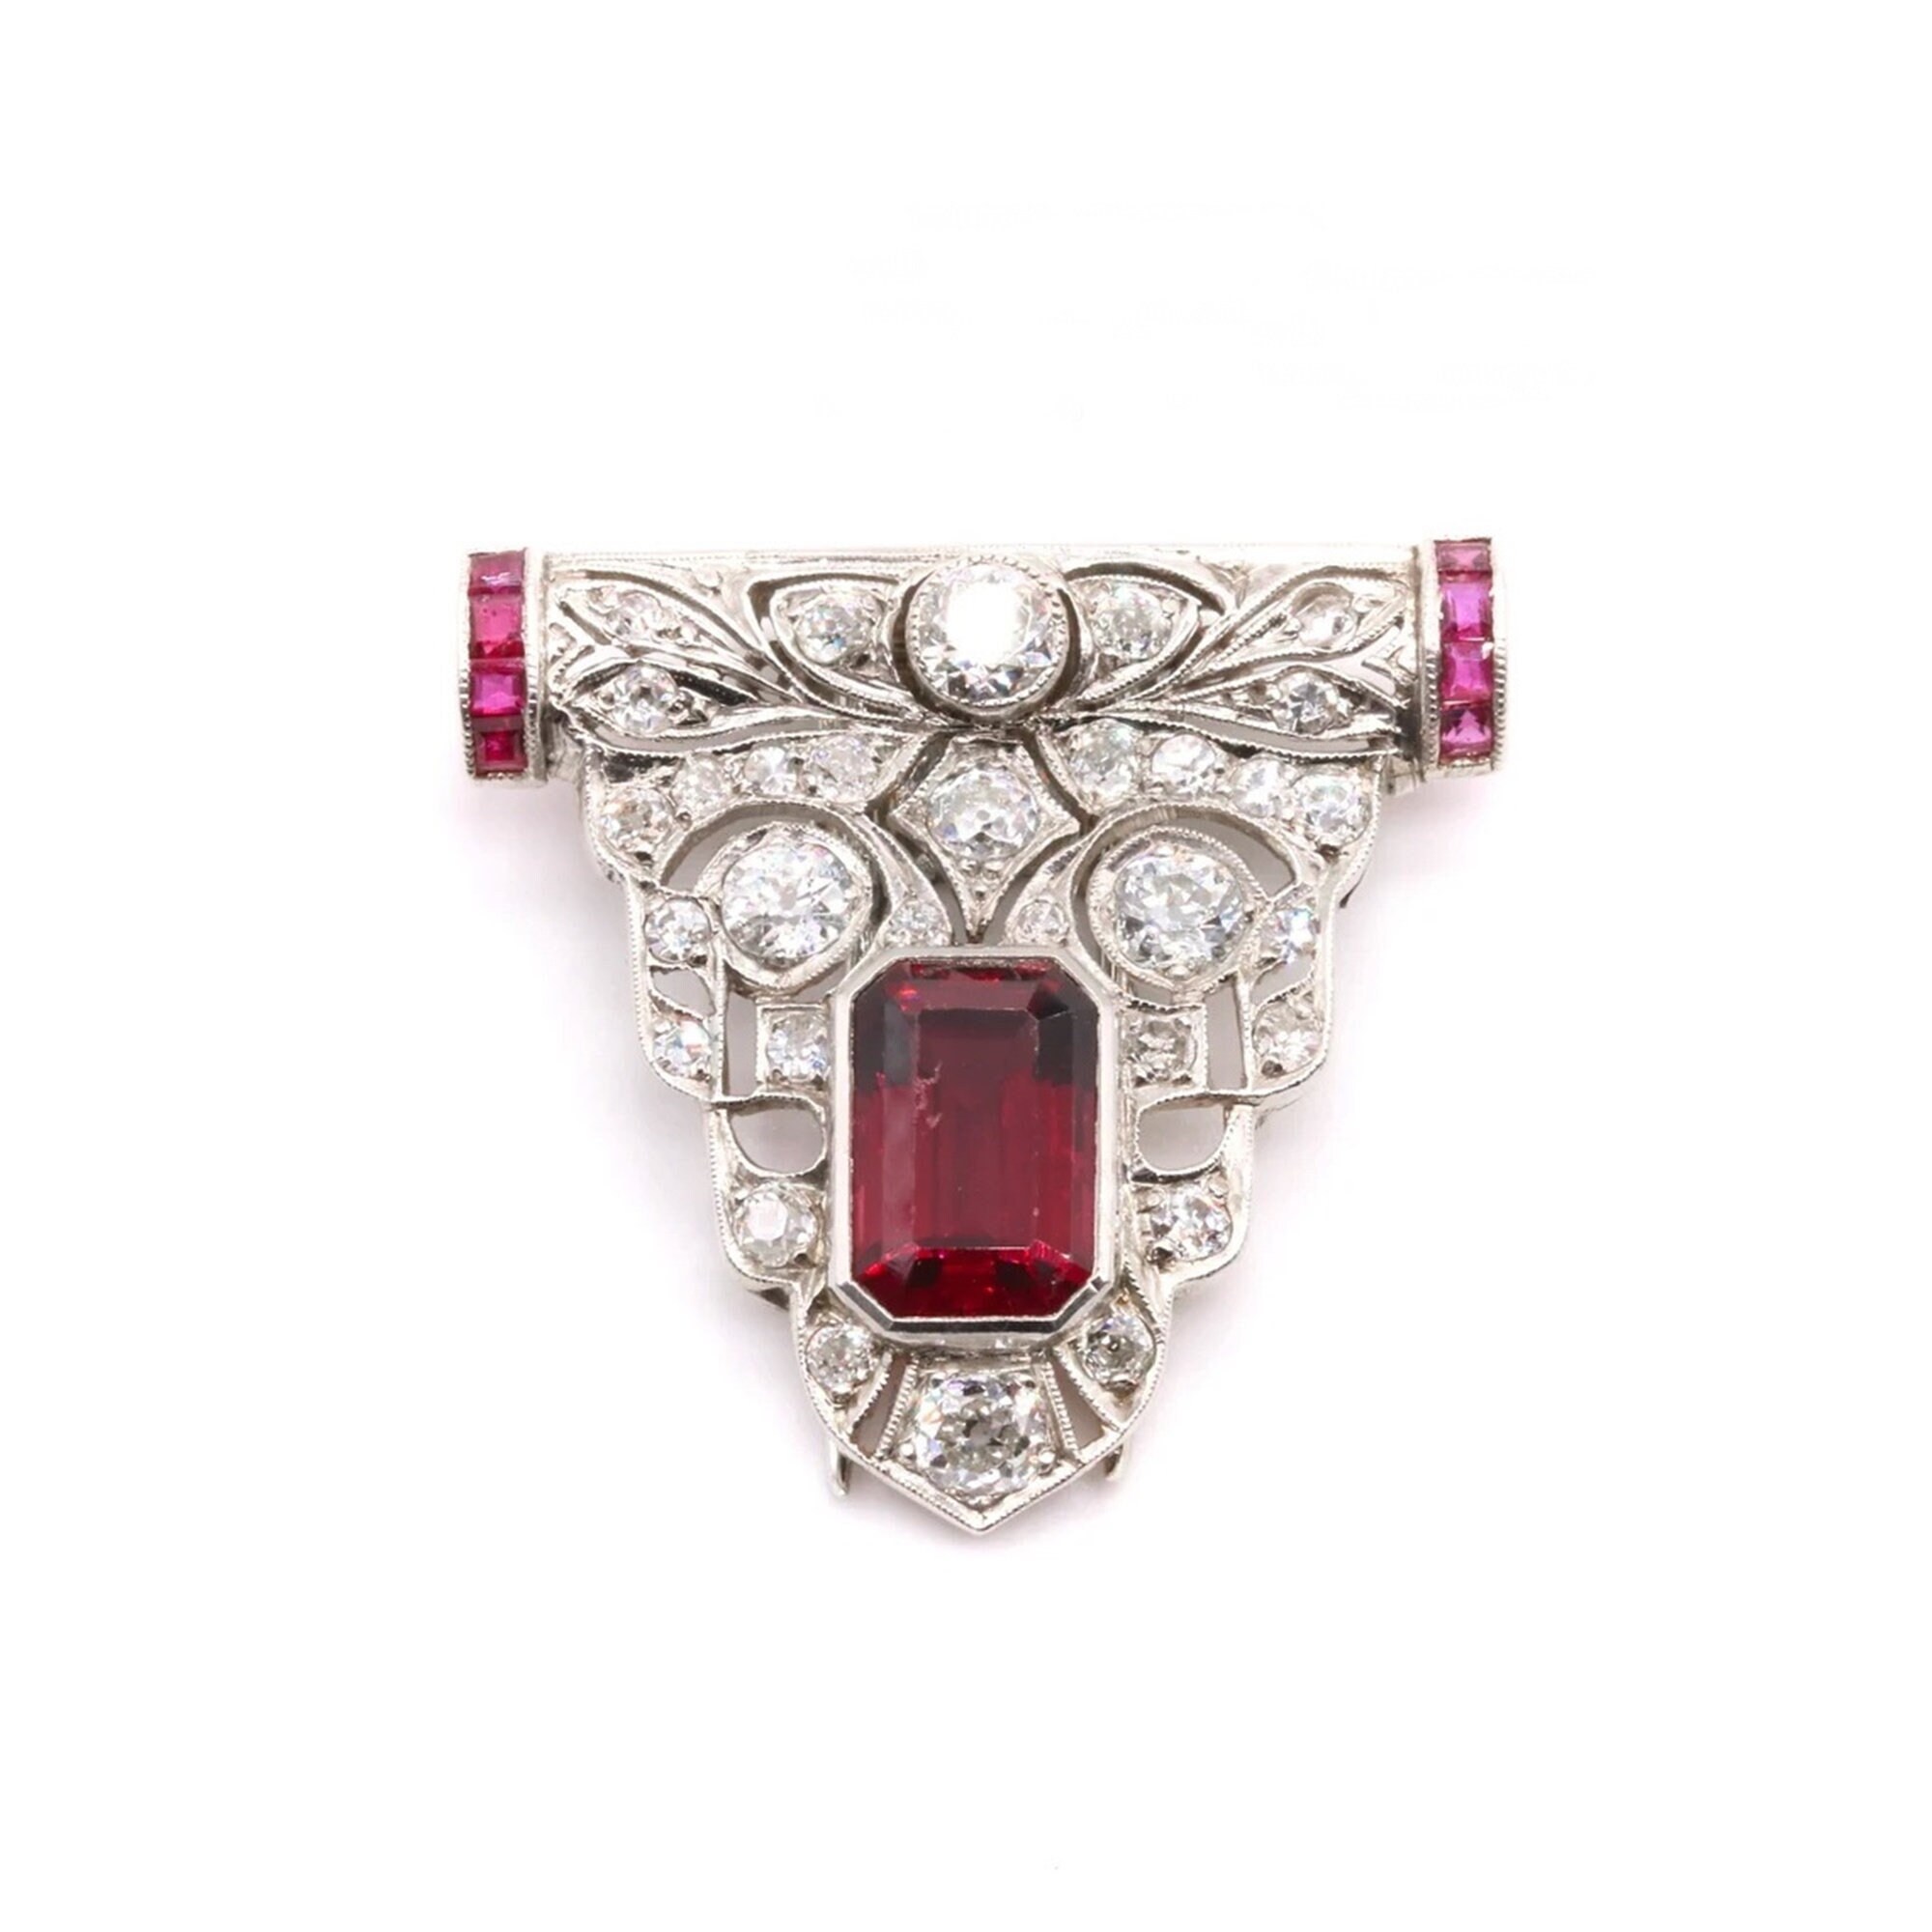 Stunning Victorian Blister Pearl, Rhinestones, and Sterling Silver - Ruby  Lane